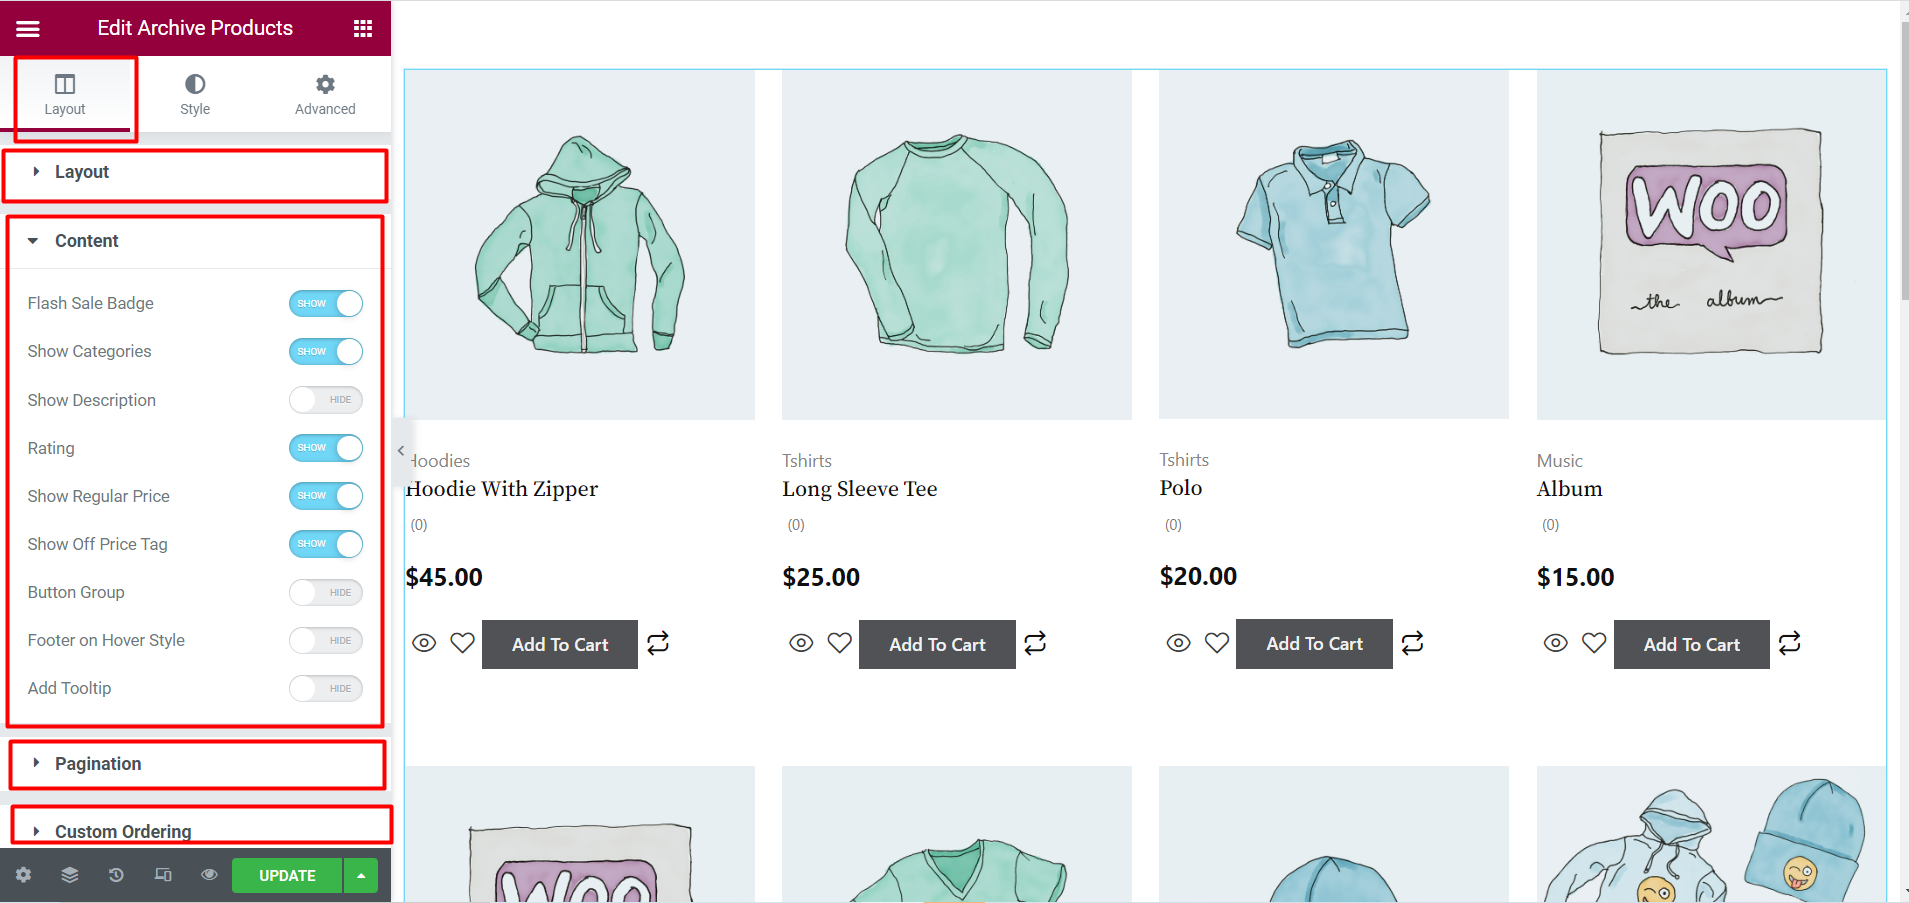 Tons of customization choices of ShopEngine's archive product widget.